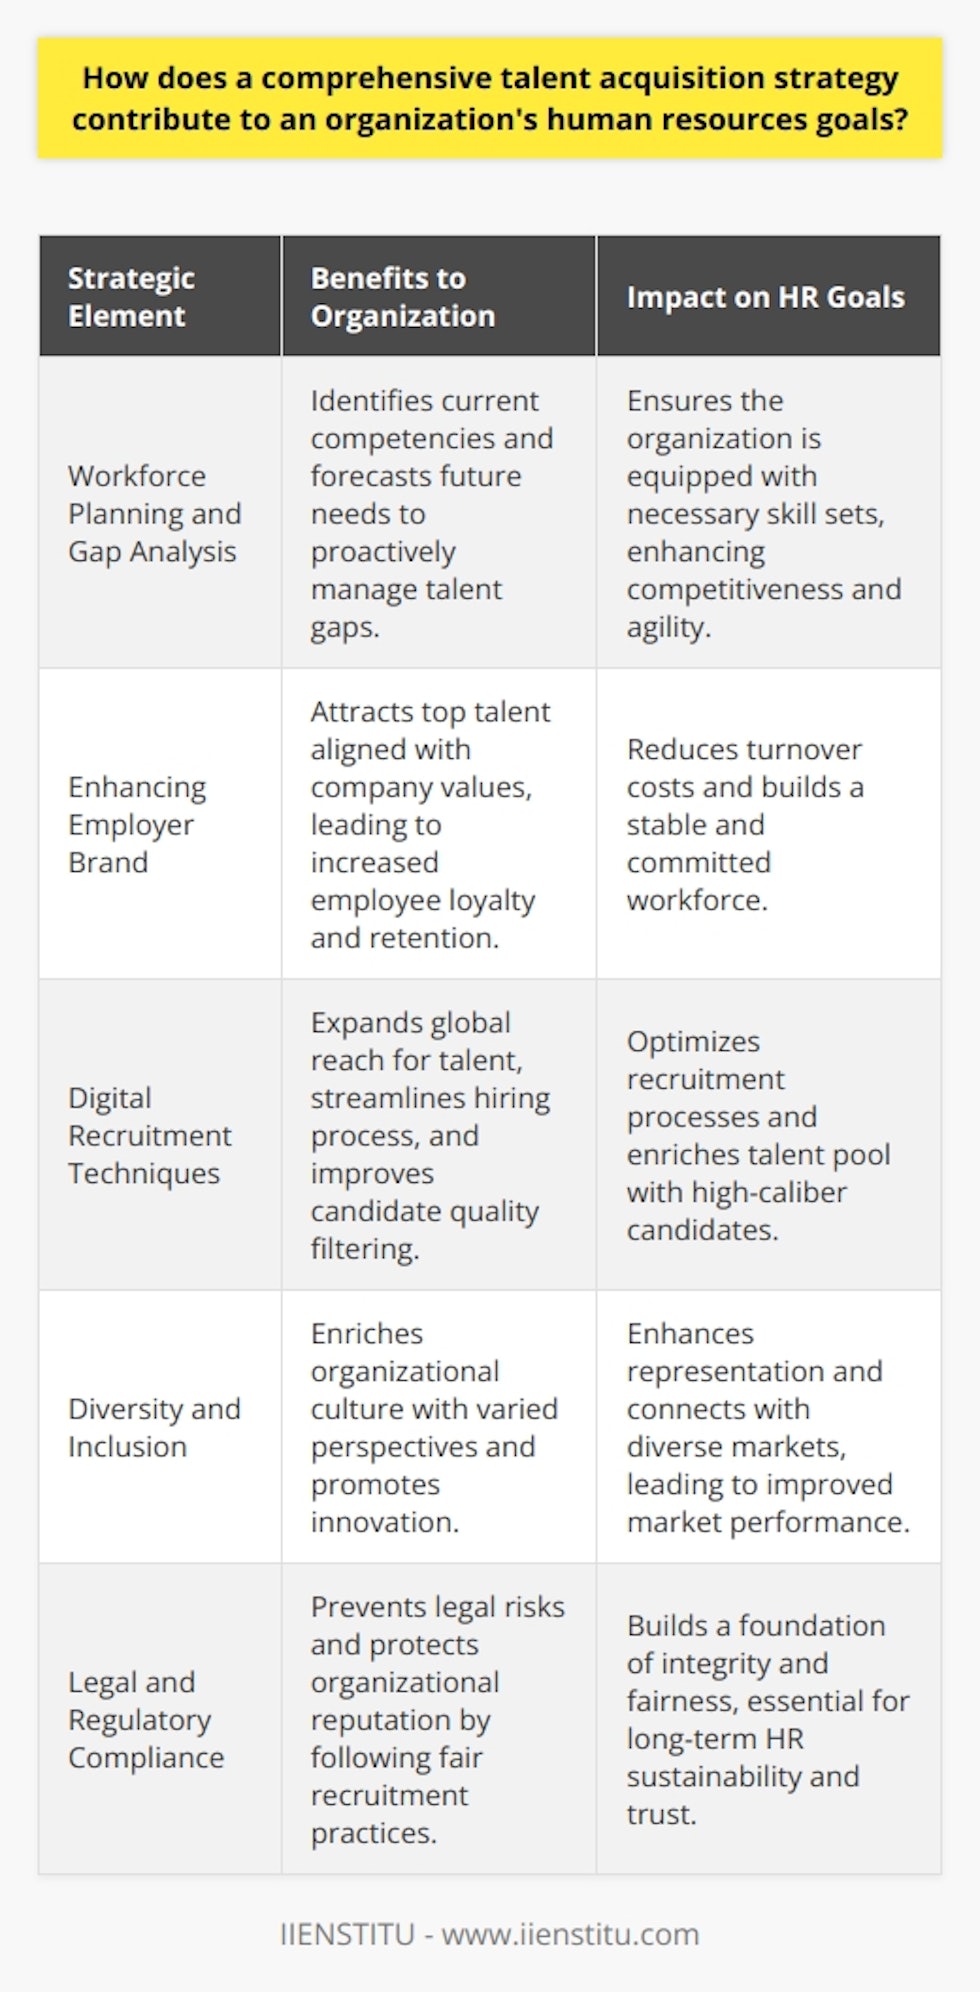 A comprehensive talent acquisition strategy is integral to the success of any organization looking to meet and surpass its human resources (HR) goals. This strategy provides a clear roadmap that aligns the acquisition of talent with the broader objectives of an organization. Let's delve deeper into how a well-defined talent acquisition plan can bolster an organization's HR initiatives.Understanding and Anticipating Skills RequirementsAt the heart of talent acquisition is workforce planning, which involves a thorough evaluation of current competencies within the organization and forecasting future needs. By performing a gap analysis, HR can pinpoint areas where the organization is lacking in essential skills. This proactive approach equips the organization with the ability to respond to market shifts by acquiring talent that possesses the requisite skill sets, ensuring the company remains competitive and agile in its industry.Strengthening Employer BrandAn employer brand that resonates with values, culture, and growth opportunities is a magnet for top-tier candidates. A cohesive strategy that highlights these aspects can distinguish an organization in a crowded job market. It attracts not just any talent, but the right talent—individuals who are aligned with the company's ethos and more likely to remain loyal. This enhances employee retention rates and reduces the costly turnover that can hamper organizational momentum.Leveraging Cutting-Edge Recruitment TechniquesTapping into the vast potential of digital channels and recruitment technologies is another cornerstone of a stellar talent acquisition strategy. By utilizing job boards, professional networking sites, and even emerging platforms like IIENSTITU, organizations can extend their reach to a global pool of candidates. Applicant tracking systems streamline the hiring process, filter candidate quality more effectively, and provide invaluable data that can refine hiring practices over time.Fostering Diversity for Corporate HealthA successful talent acquisition strategy also recognizes the value of diversity and inclusion for the vitality of the organization. By attracting candidates from varied backgrounds, the company benefits from a wider array of perspectives, experiences, and problem-solving approaches. This not only fosters innovation but also leads to better representation within the organization—reflecting the diverse composition of global markets and customer bases.Legal Compliance as a SafeguardEnsuring compliance with employment laws and regulations is a must for any talent acquisition strategy. This includes adhering to fair recruitment practices, equal opportunity employment, and data protection laws. Ignoring these aspects can expose an organization to legal repercussions and damage its reputation. A comprehensive strategy, therefore, embeds best practices that safeguard the organization and codify fairness in the hiring process.In essence, synchronizing talent acquisition with HR goals is an exercise in strategic foresight and operational excellence. By understanding workforce requirements, boosting the employer brand, adopting innovative recruitment methods, embracing diversity, and upholding legal integrity, an organization crafts a formidable team. This team is not just prepared to tackle current roles but is also geared to propel the company towards its envisioned future.